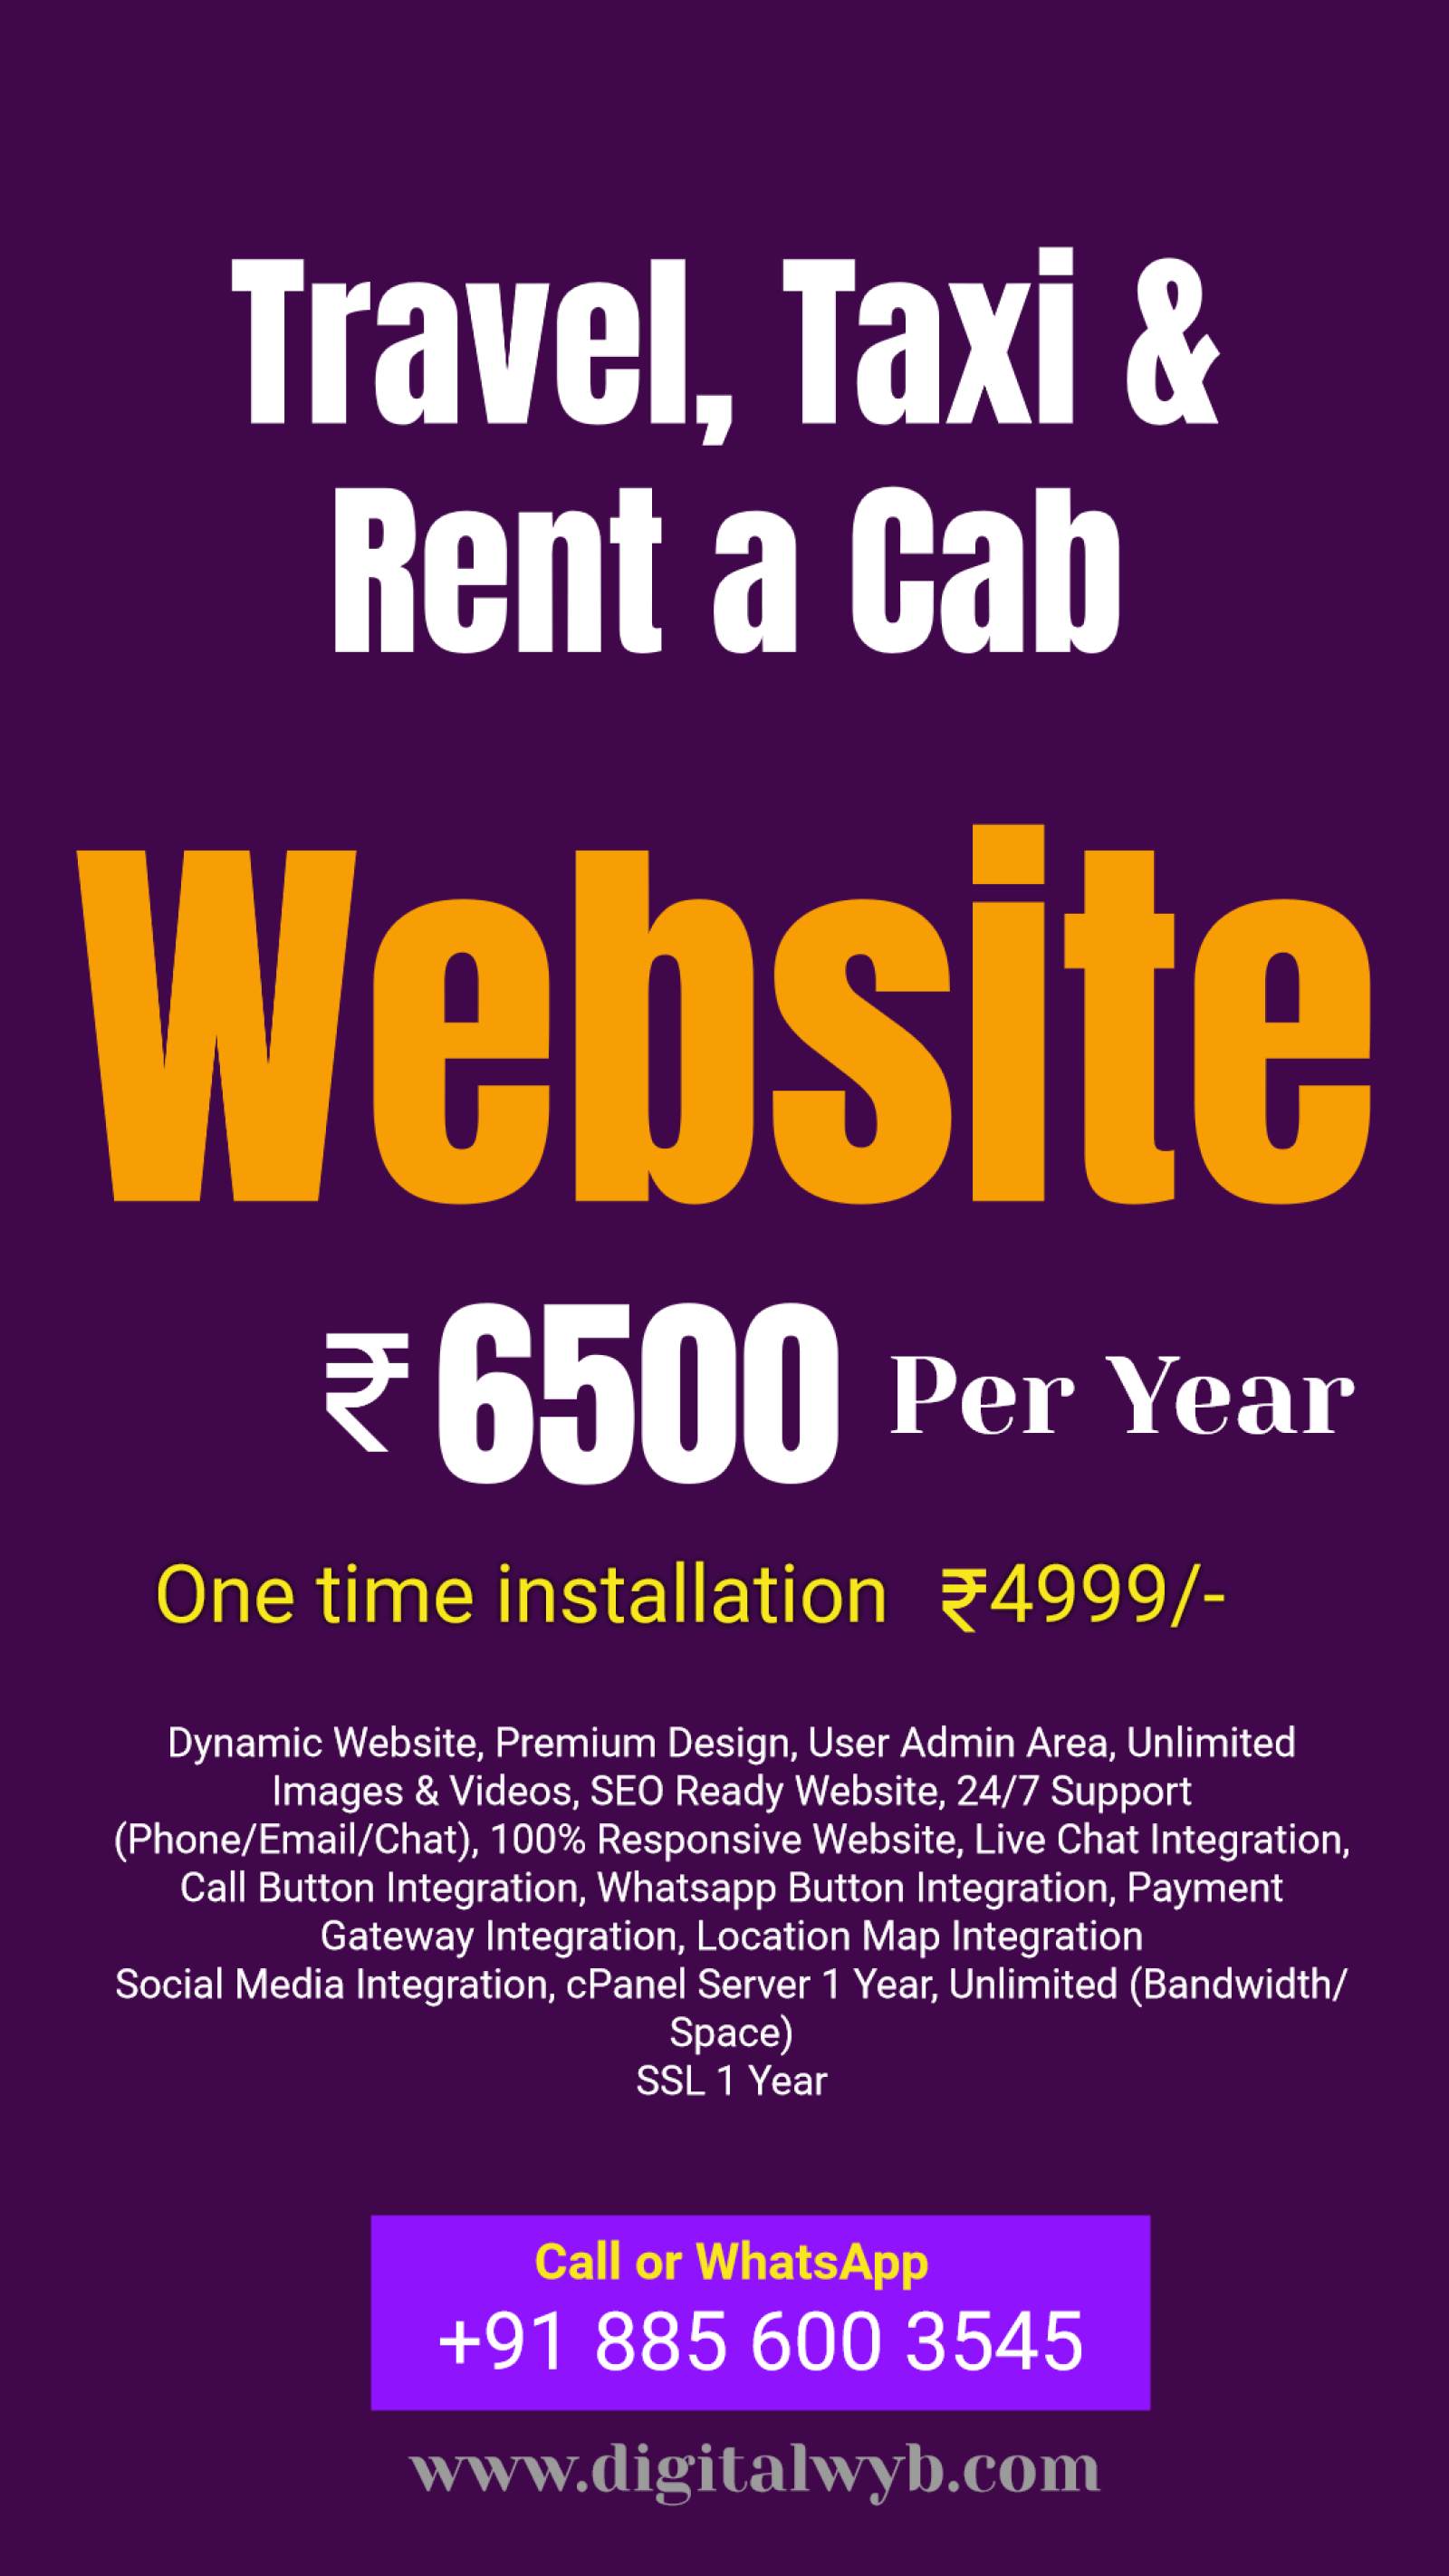 Create Your Digital Presence with Our All-Inclusive Travel, Taxi & Cab Rental Website Package at Just ₹6500/Year!